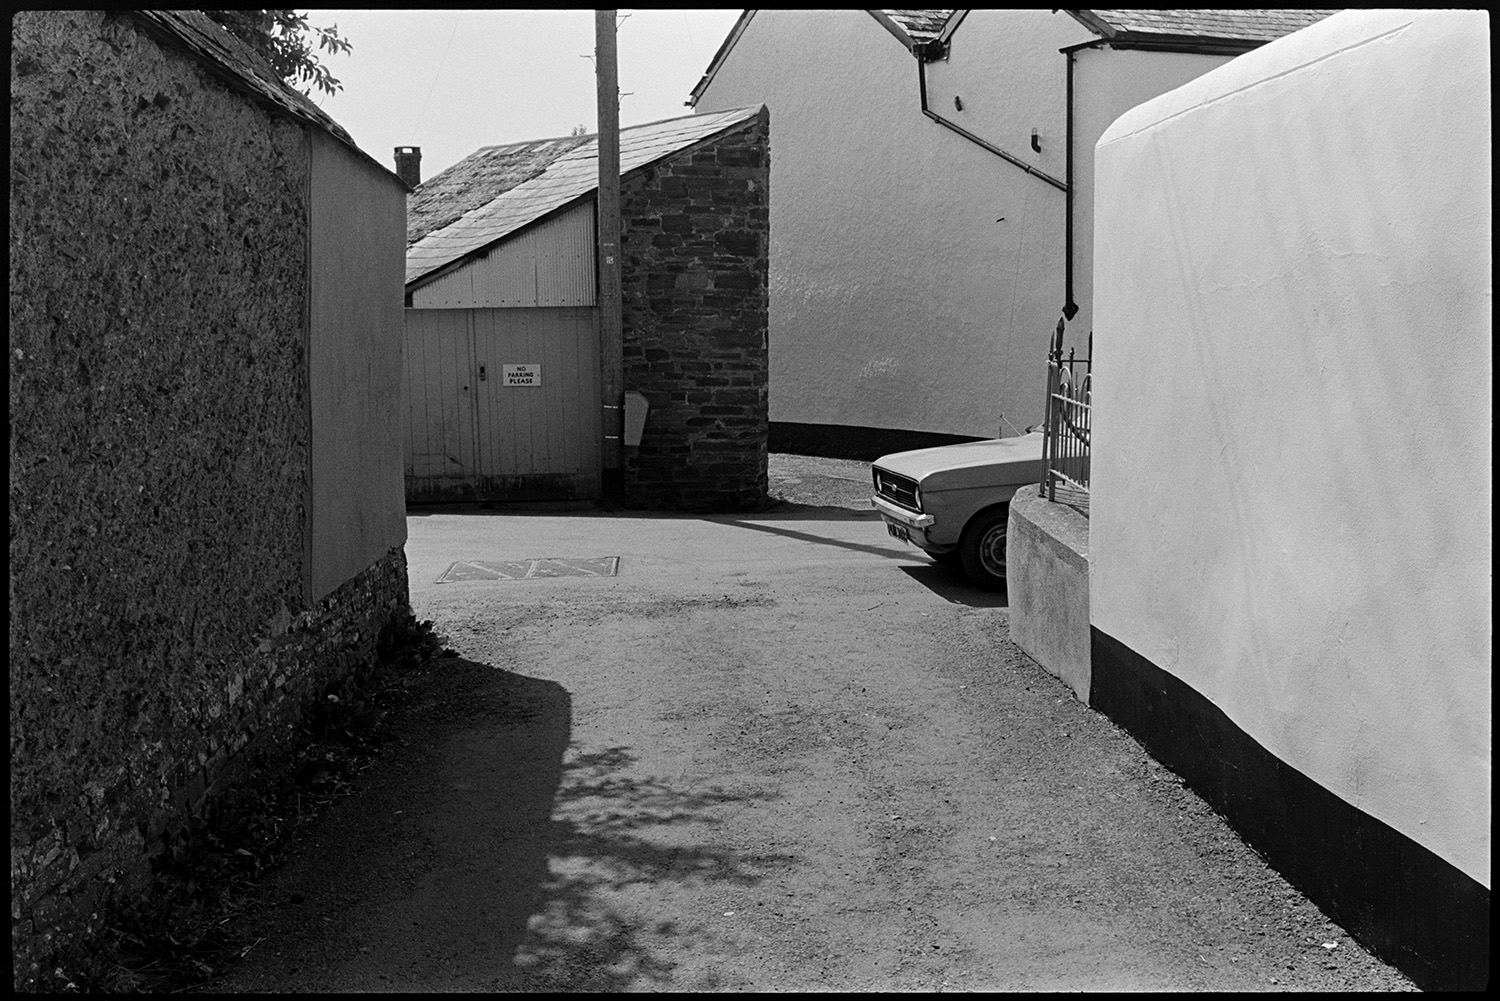 Street scenes. Man and children. 
[A view of houses and walls in North Street, Dolton. A garage at the end of the road junction is visible.]